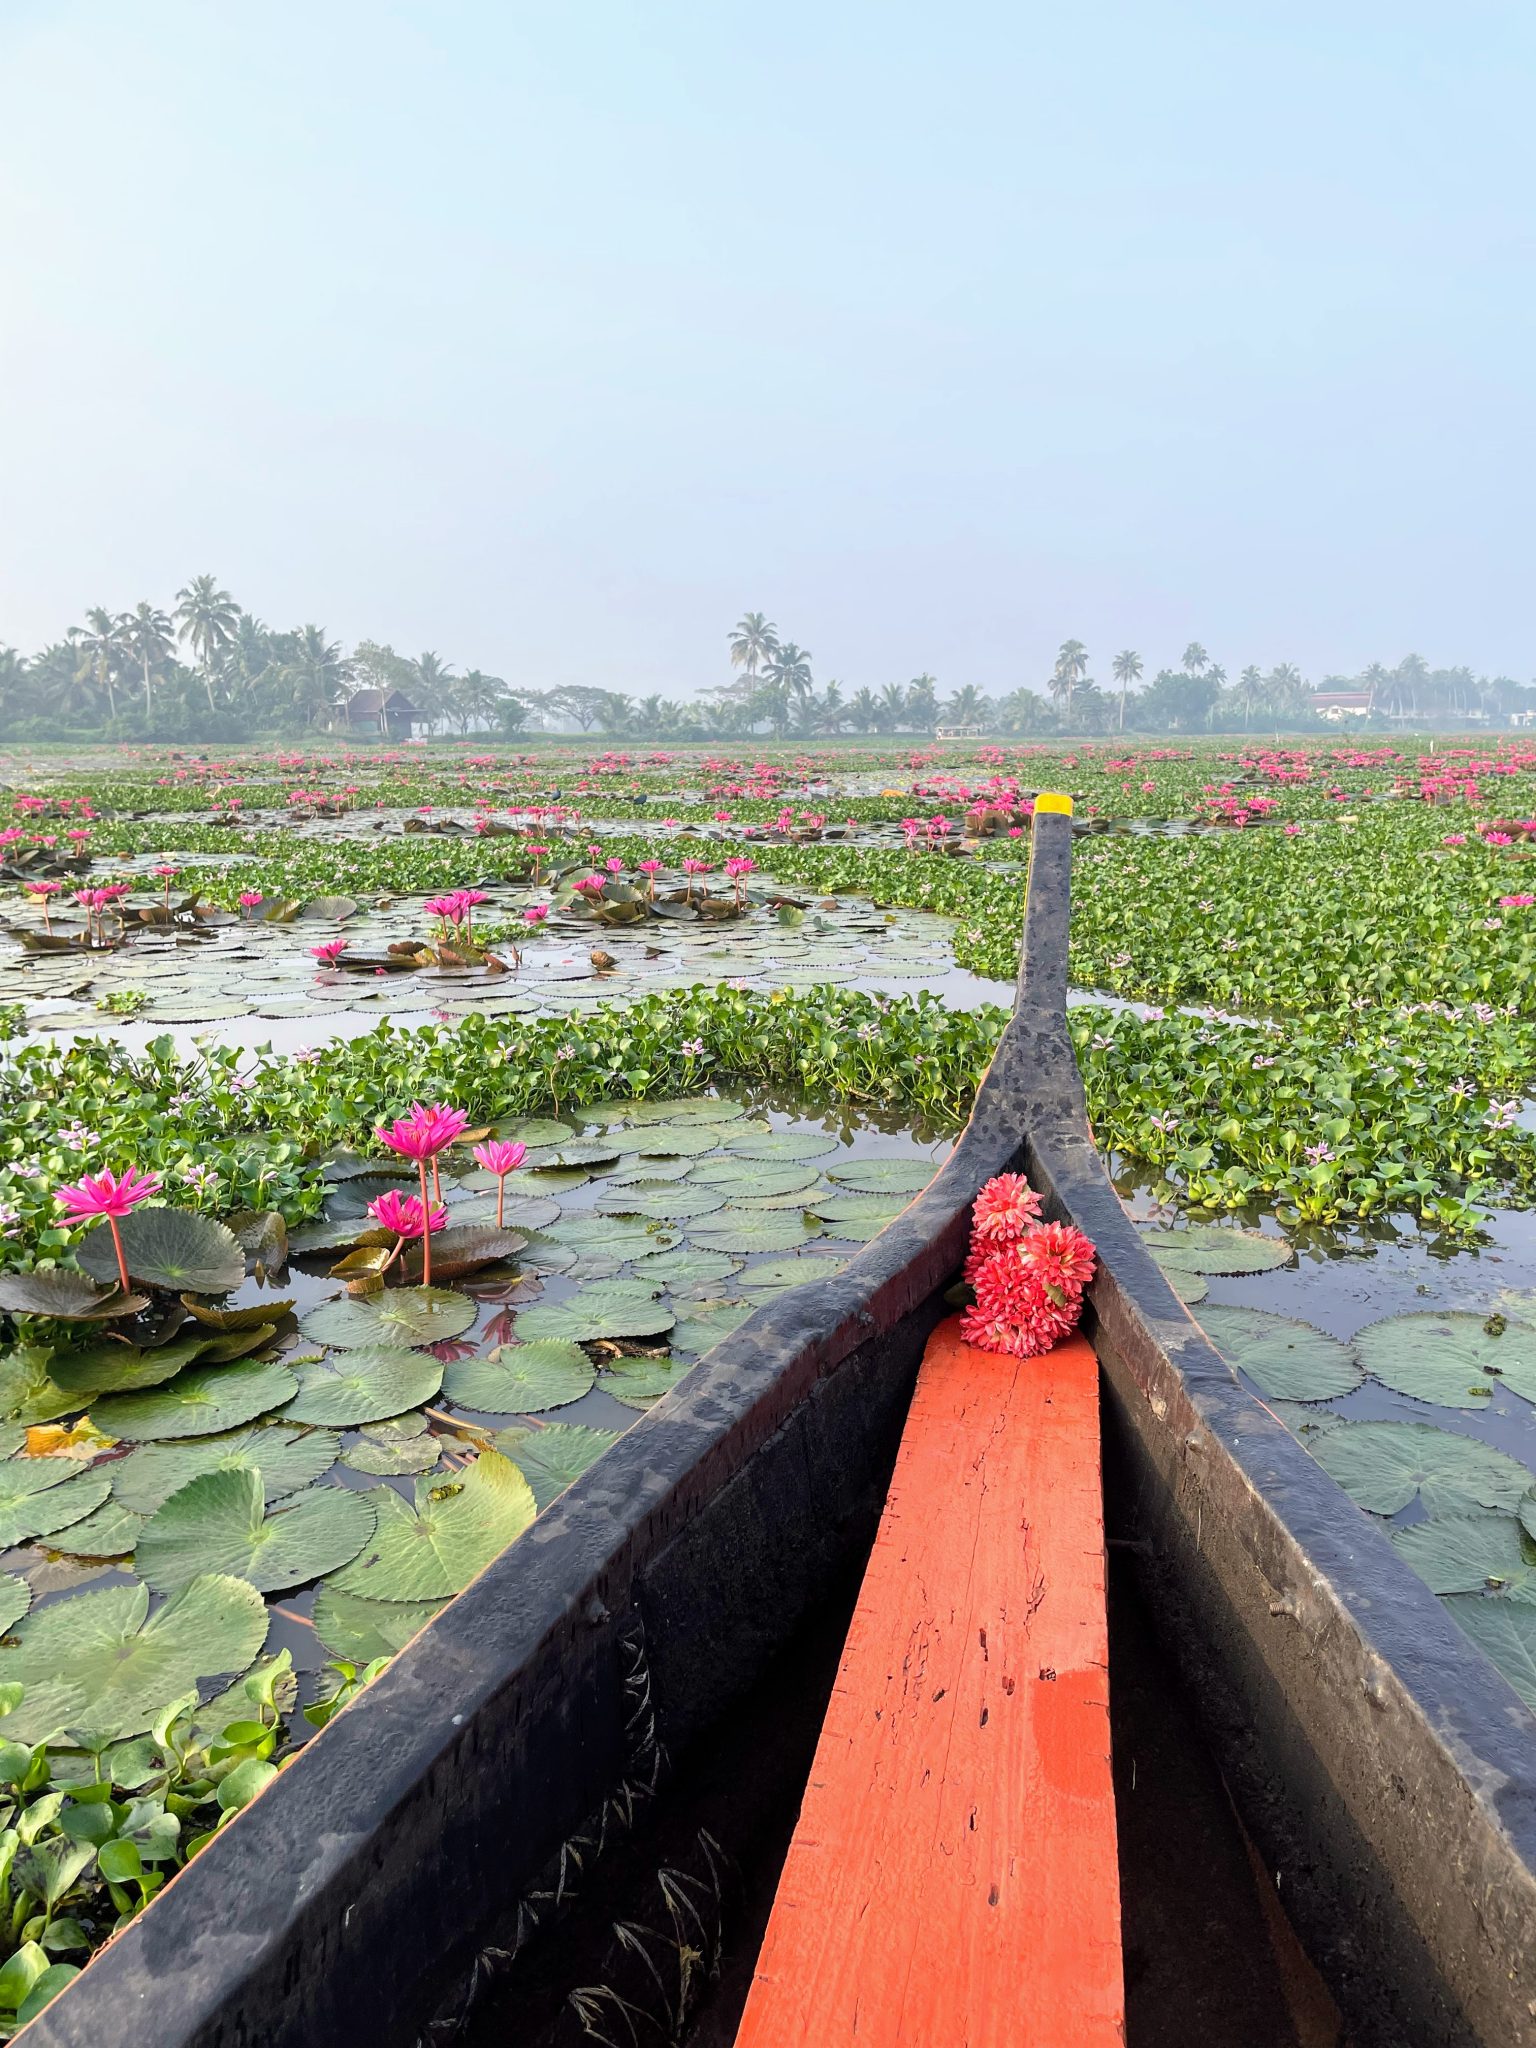 A front view of a boat gliding through a large, serene water body in Kerala filled with pink lotuses and green lily pads. A bouquet of pink flowers is placed on the boat's edge. In the background, there are palm trees under a clear, bluish sky.